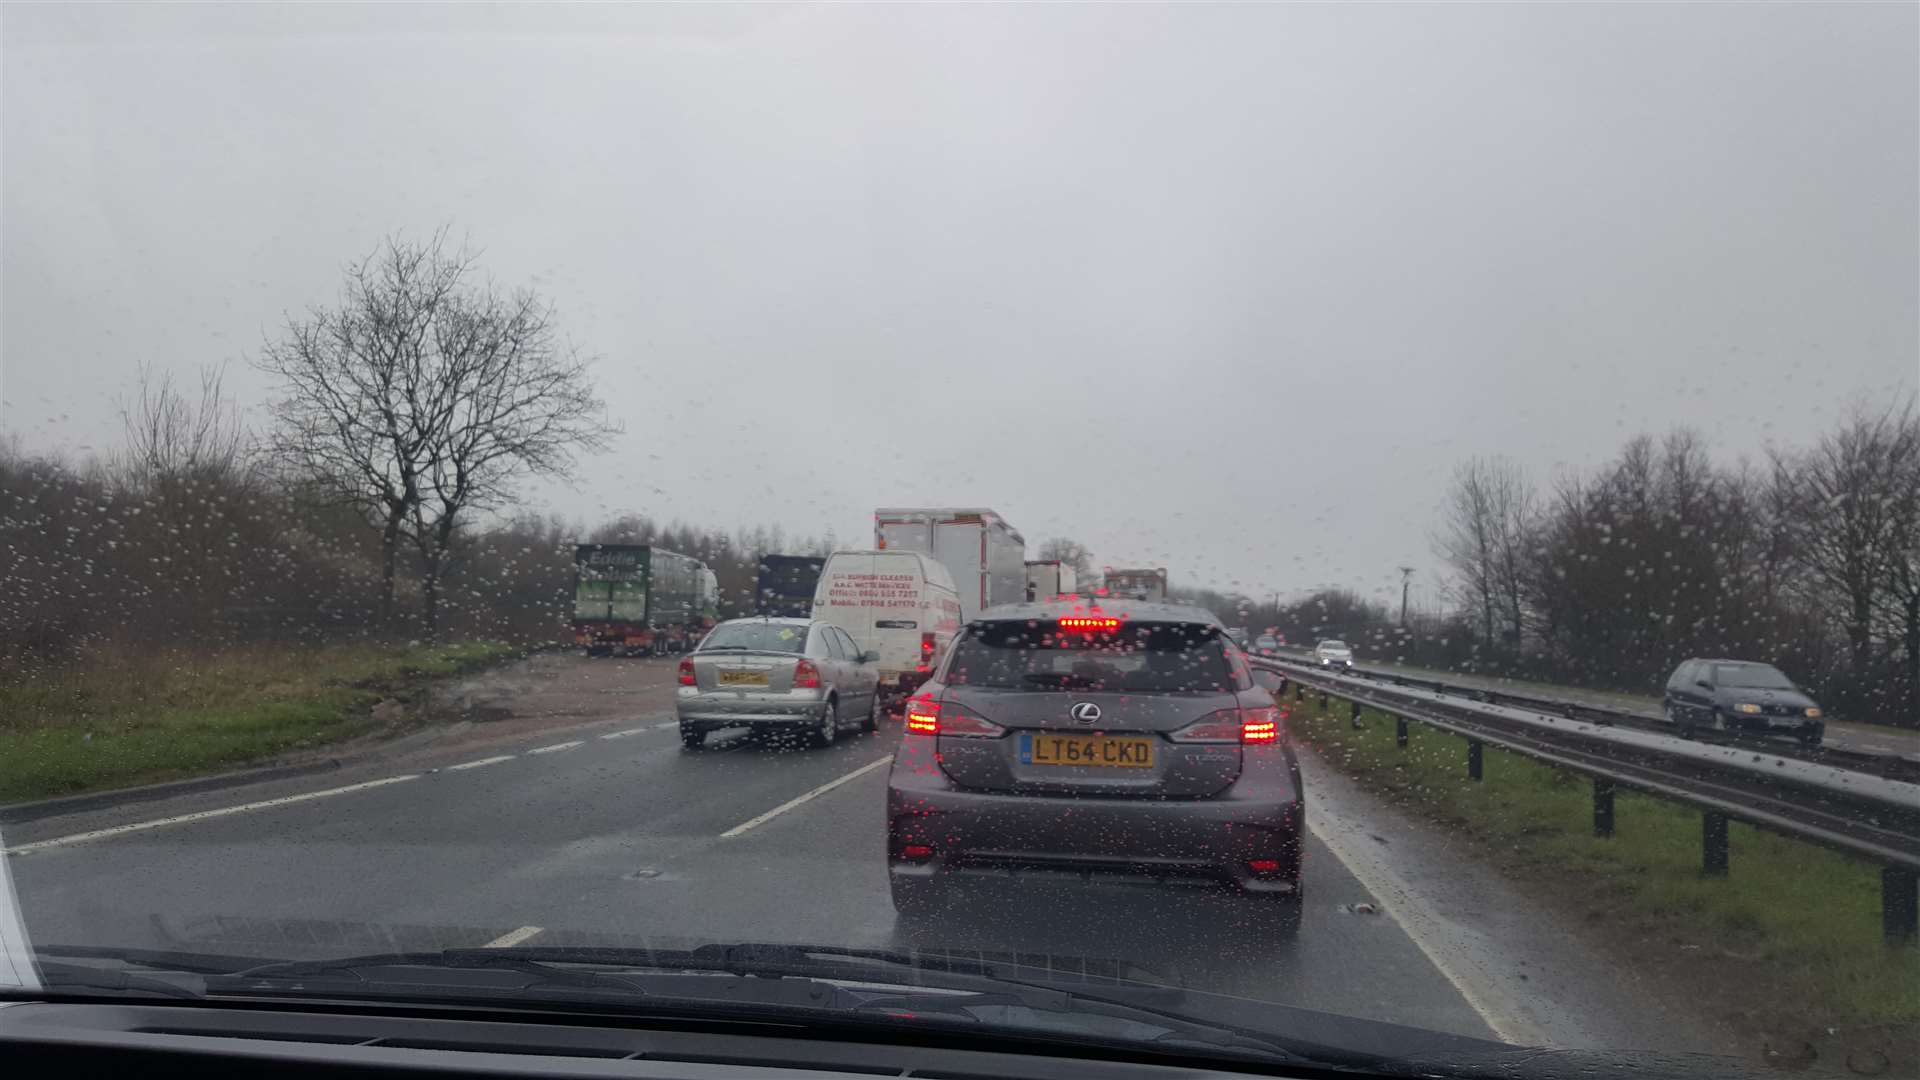 Traffic is building on the A249 following the M20 accident